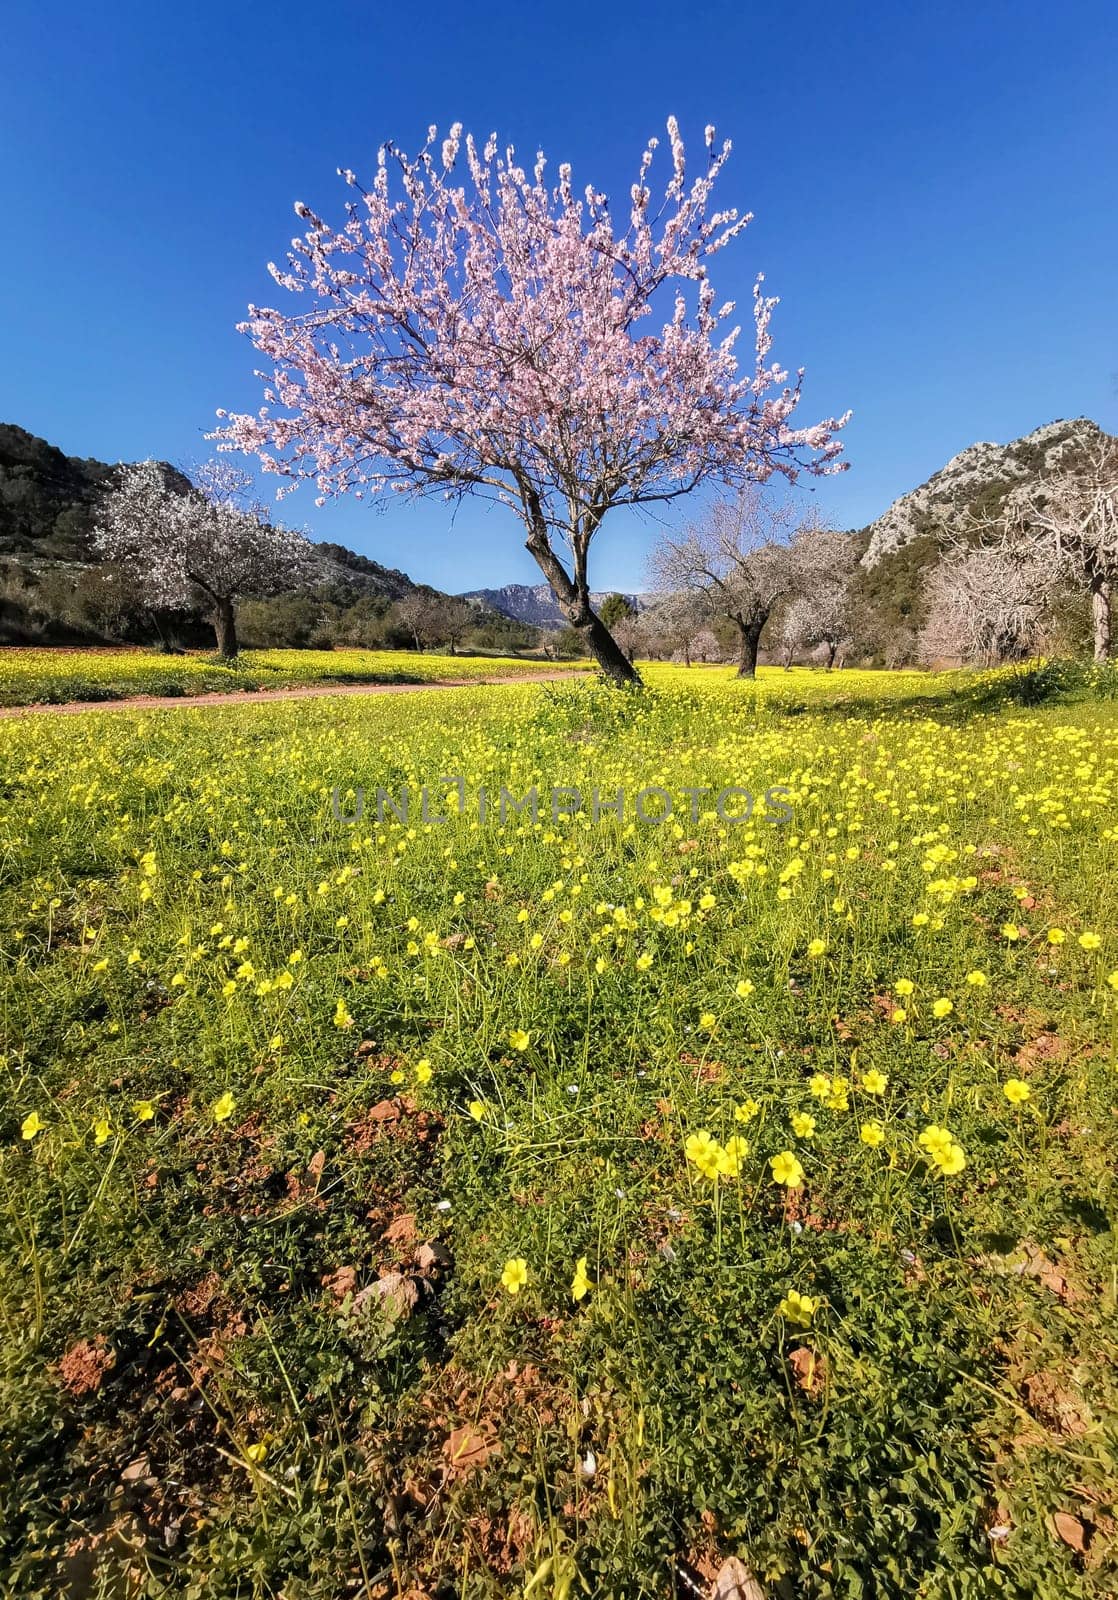 A lone almond tree in full bloom stands tall amidst a carpet of wild yellow flowers, under the clear blue sky.